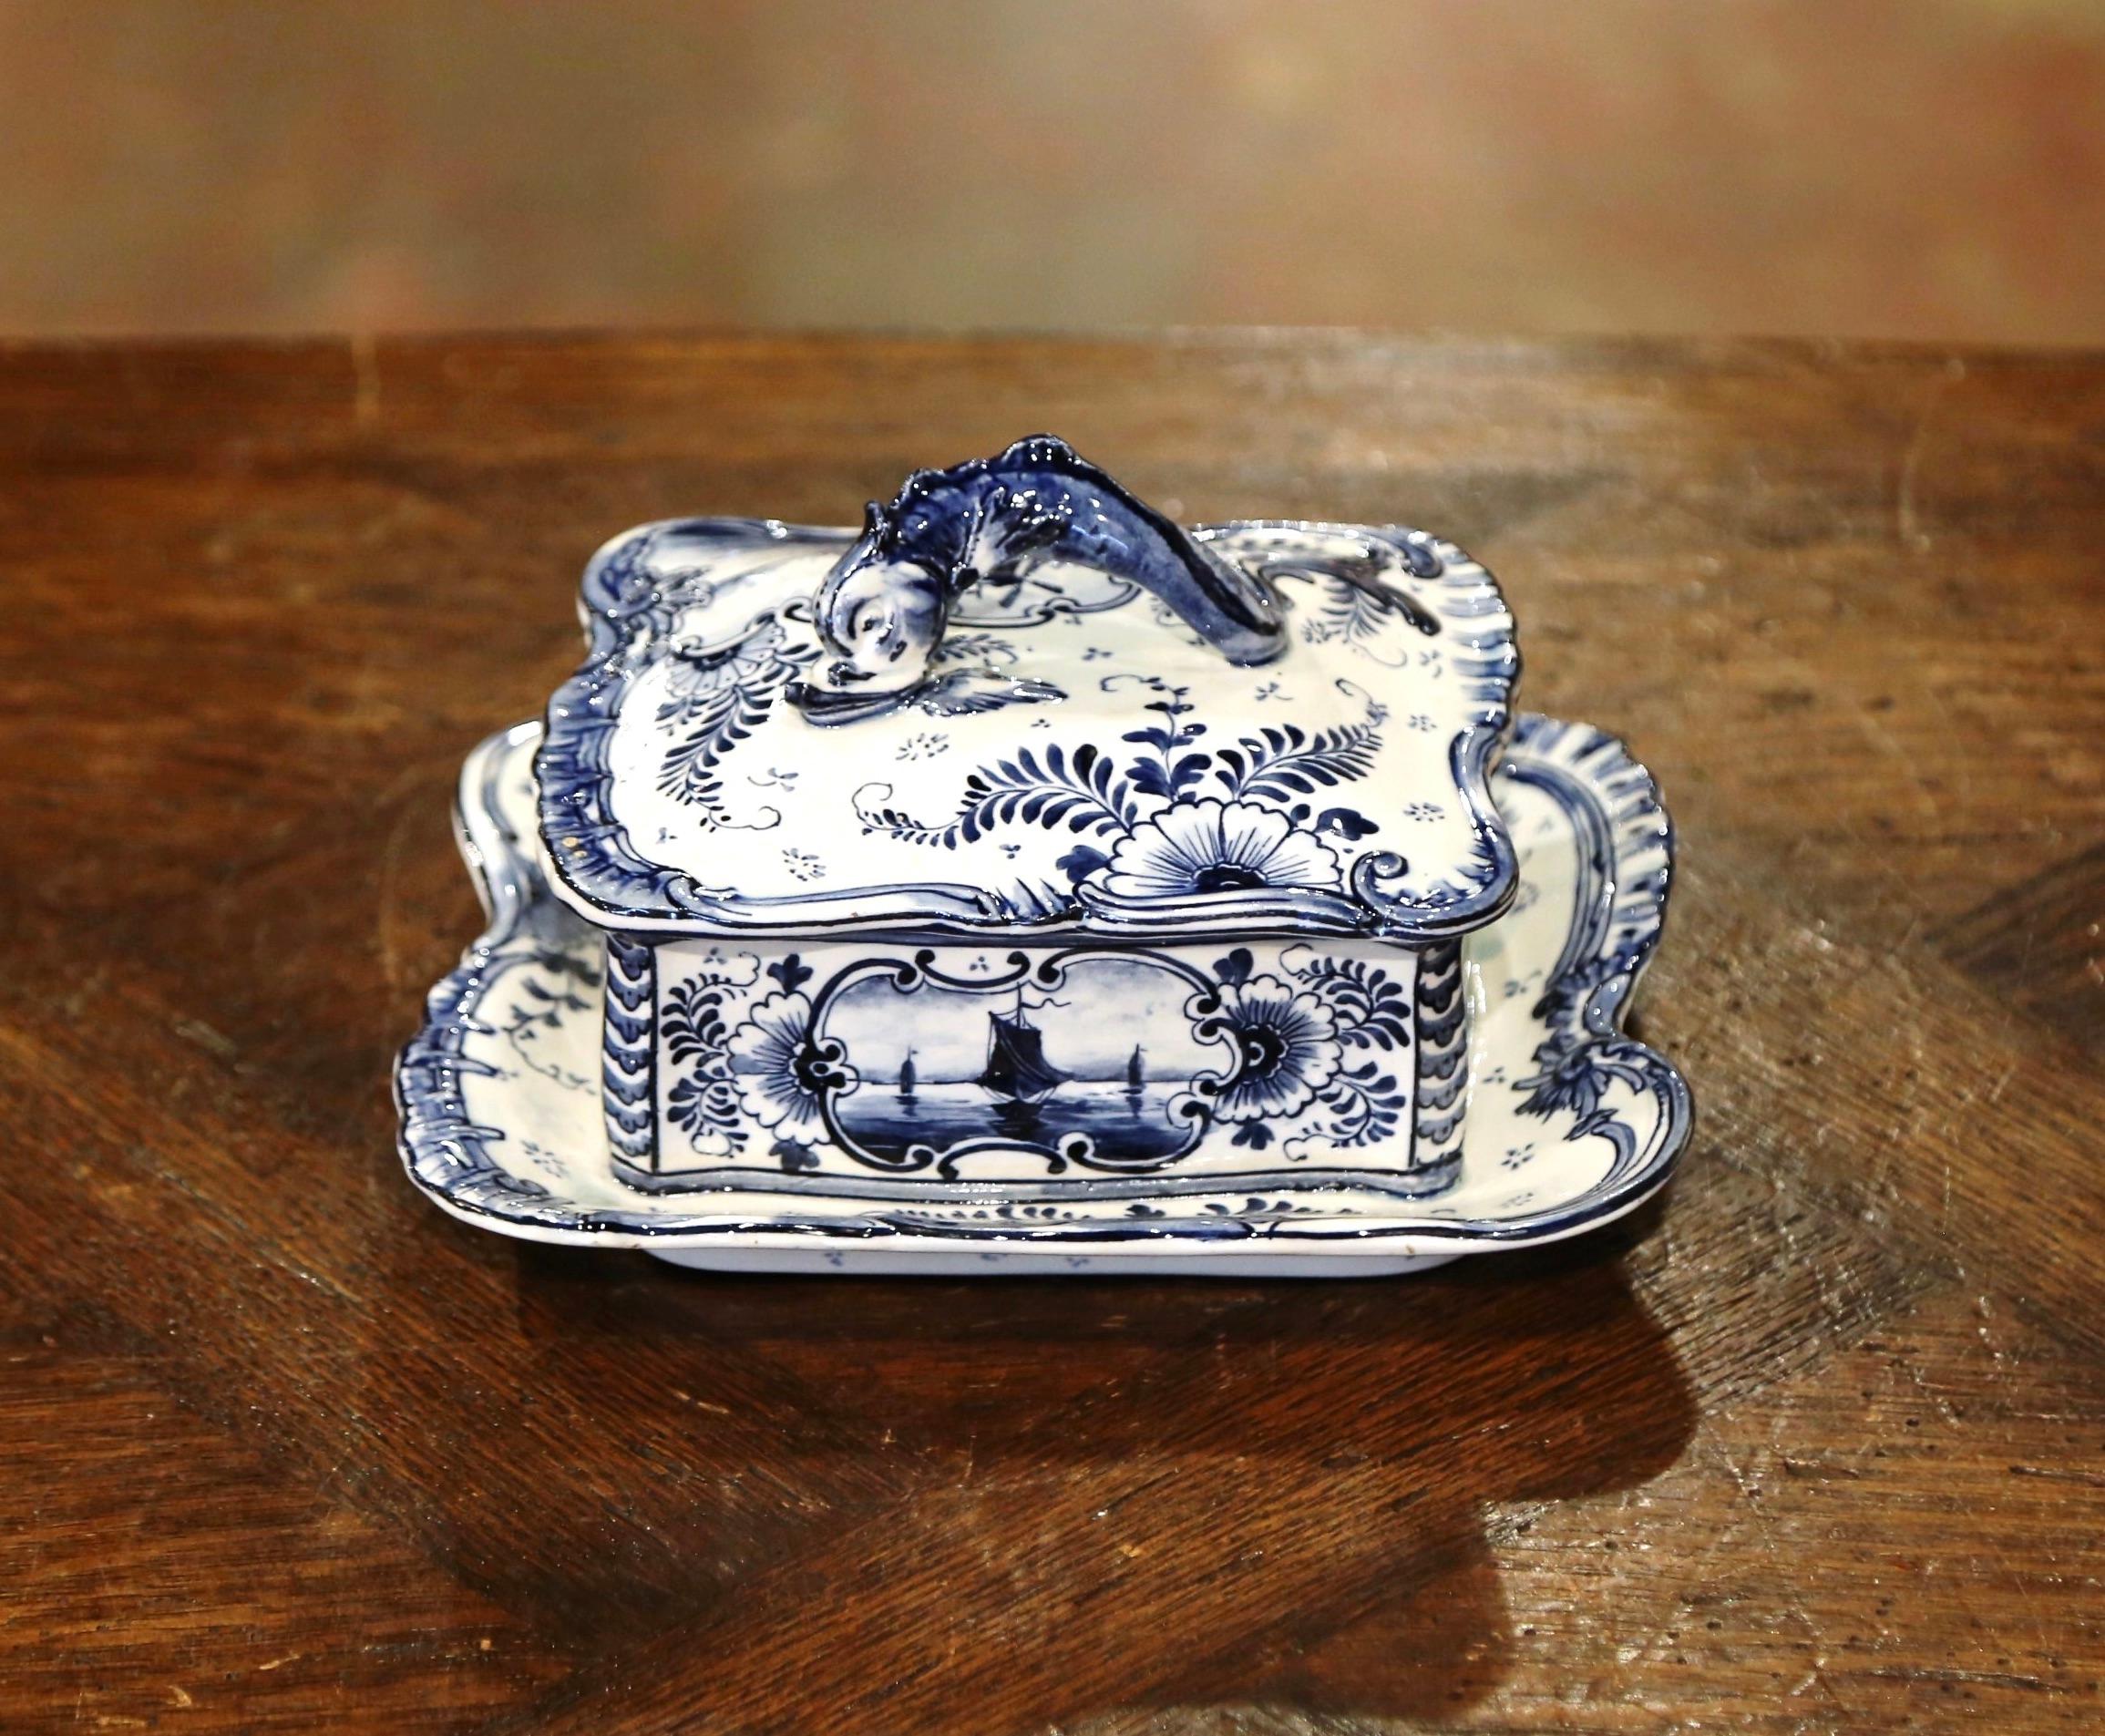 This faience decorative box was crafted in Germany, circa 1900; attributed to Royal Bonn (trade name for Franz Anton Mehlem), the dish is rectangular in shape and sits on an attached platter base. It features a figural dolphin in high relief as the